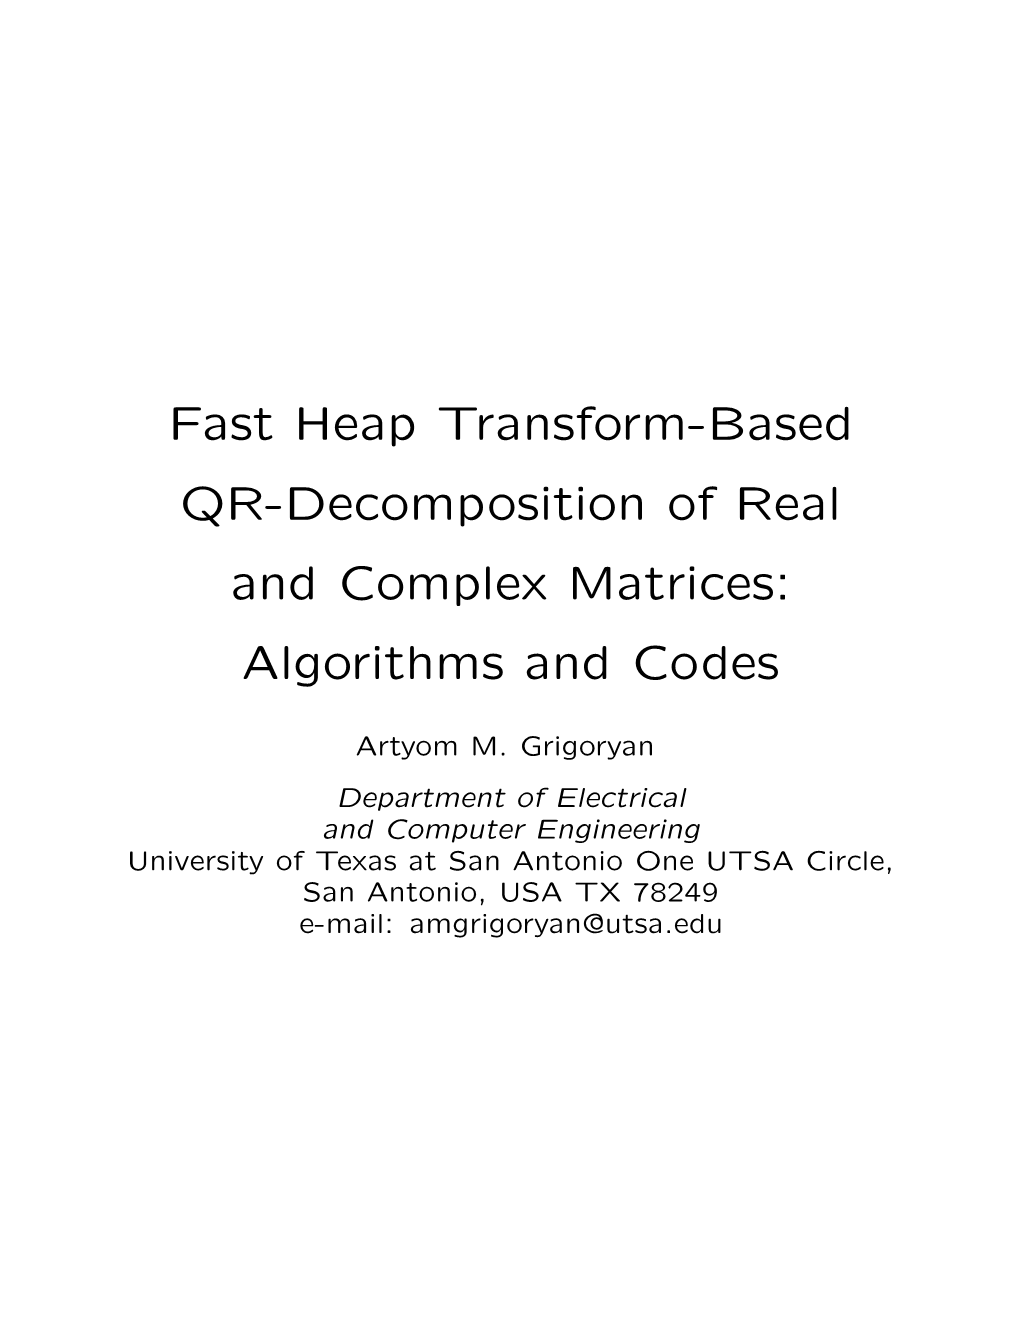 Fast Heap Transform-Based QR-Decomposition of Real and Complex Matrices: Algorithms and Codes